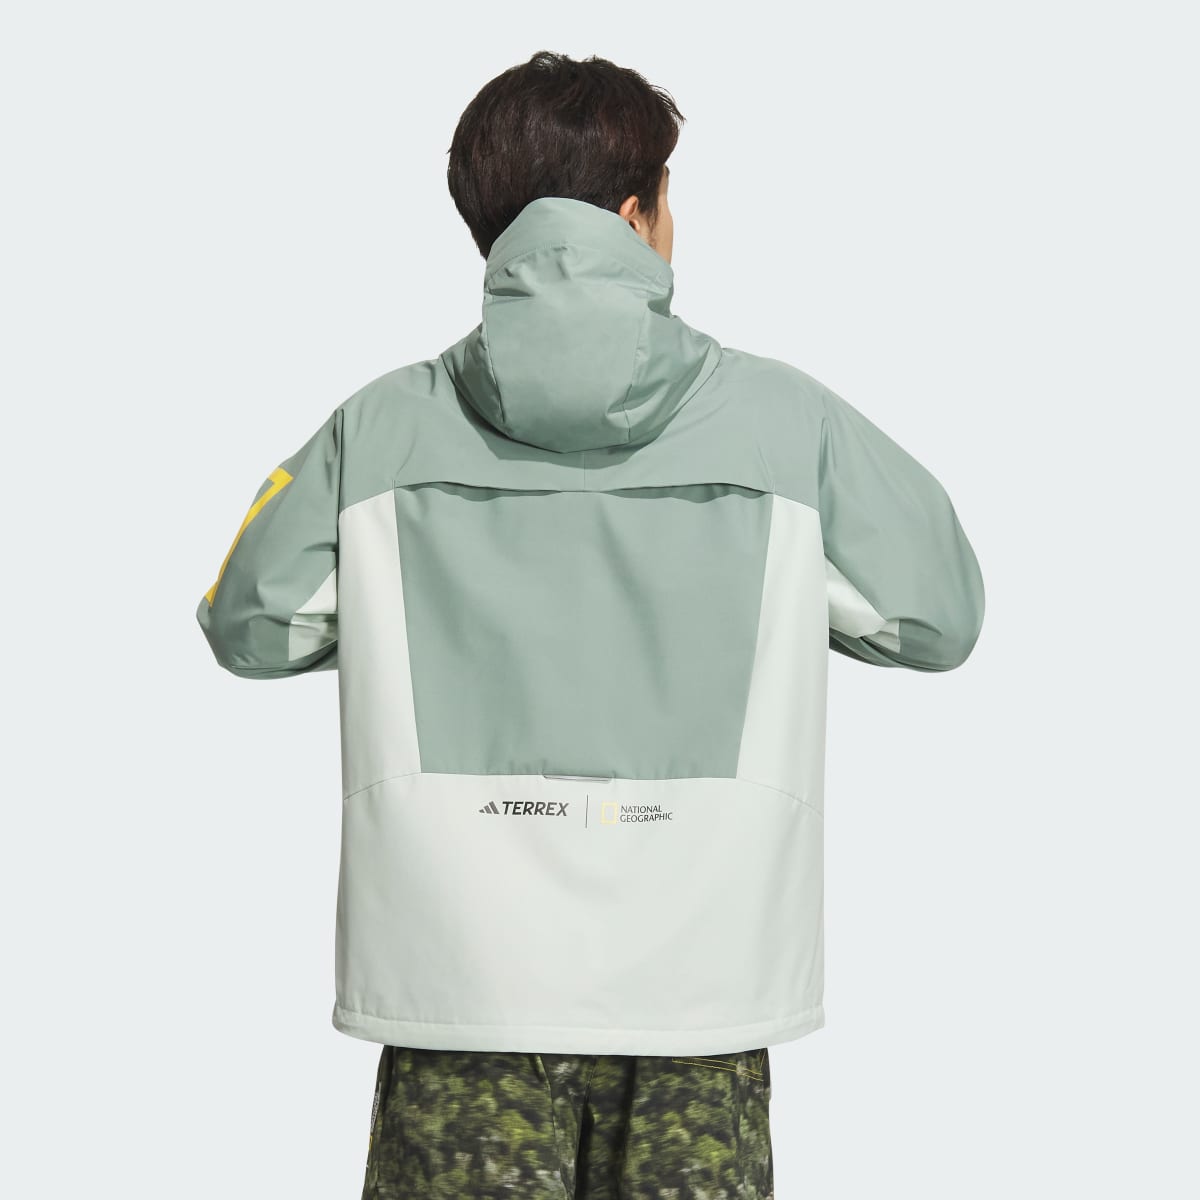 Adidas National Geographic WINDSTOPPER® Jacket. 7